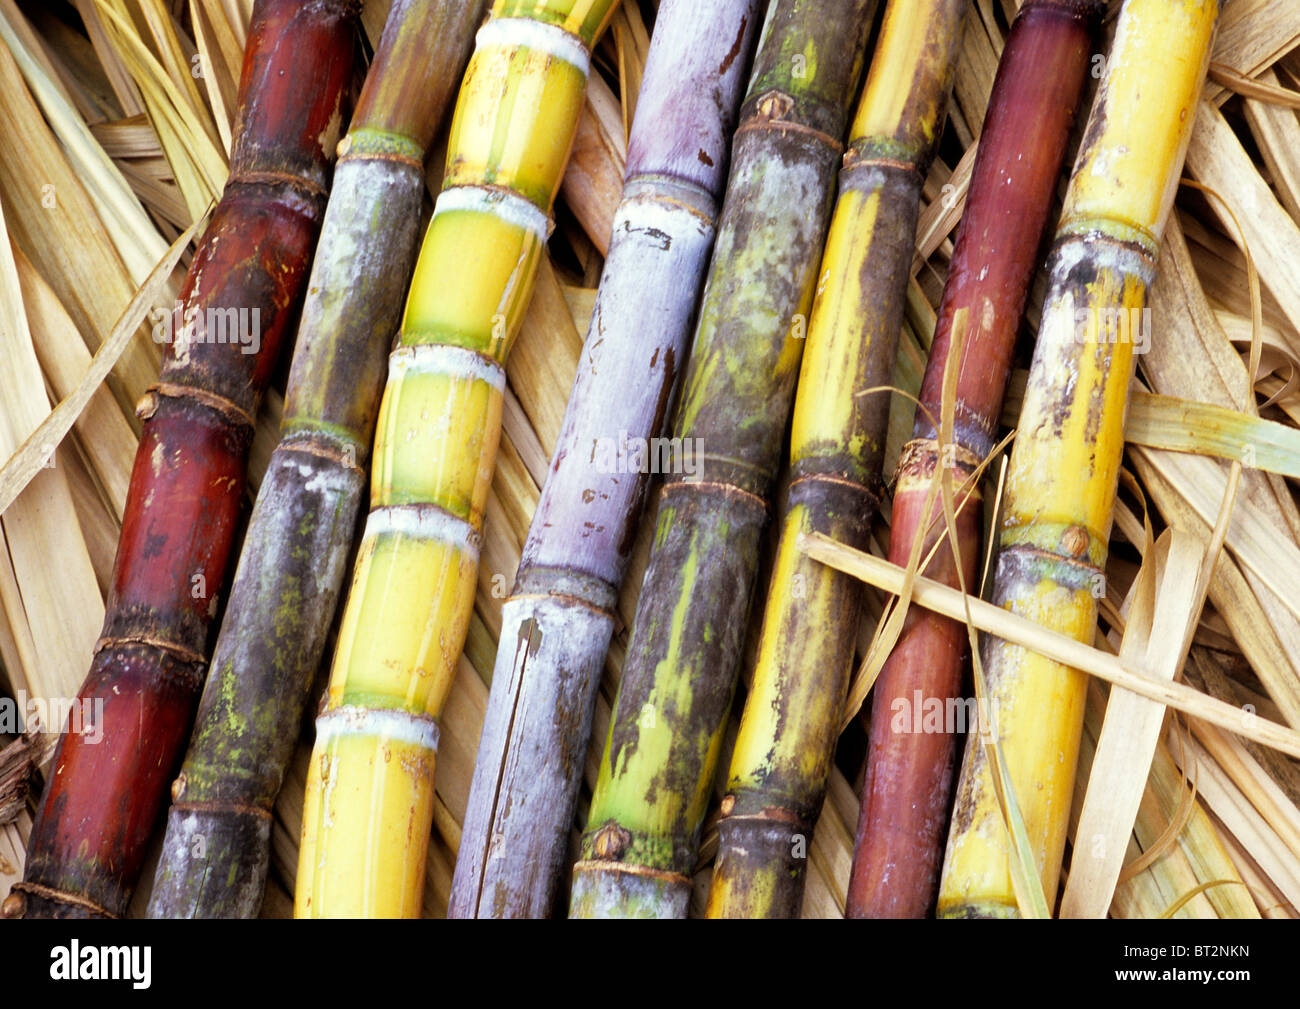 Sugar Cane in all colors, red, yellow and purple Stock Photo - Alamy